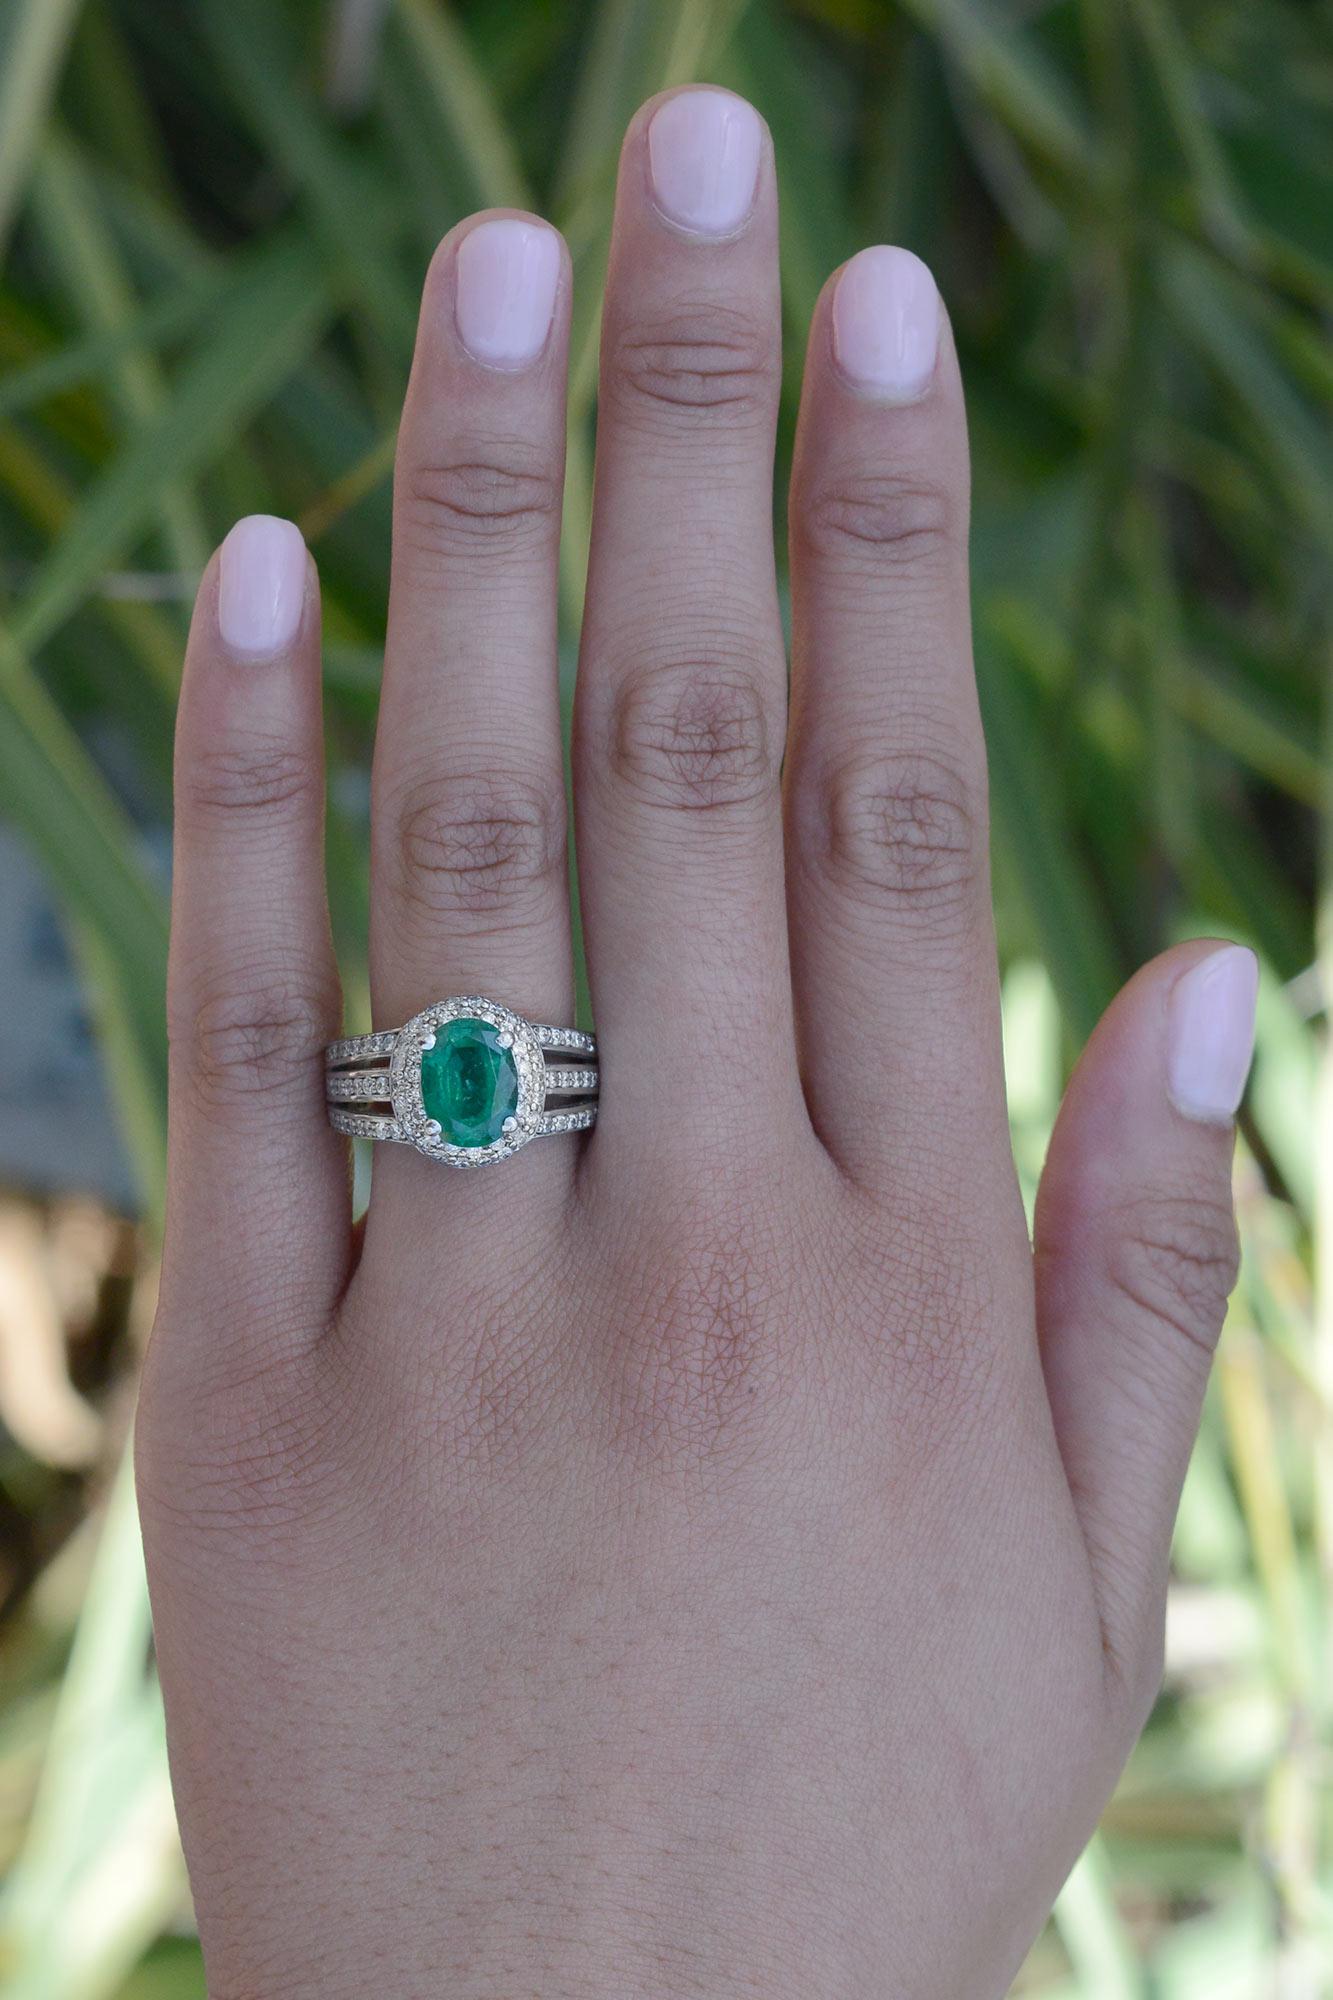 This vintage emerald and diamond engagement ring is a stunning piece of jewelry sure to draw admiration for its lush hue and shimmering diamonds. The wide 3 row diamond band features a prominent and vivid 2.39 carat oval emerald and numerous round